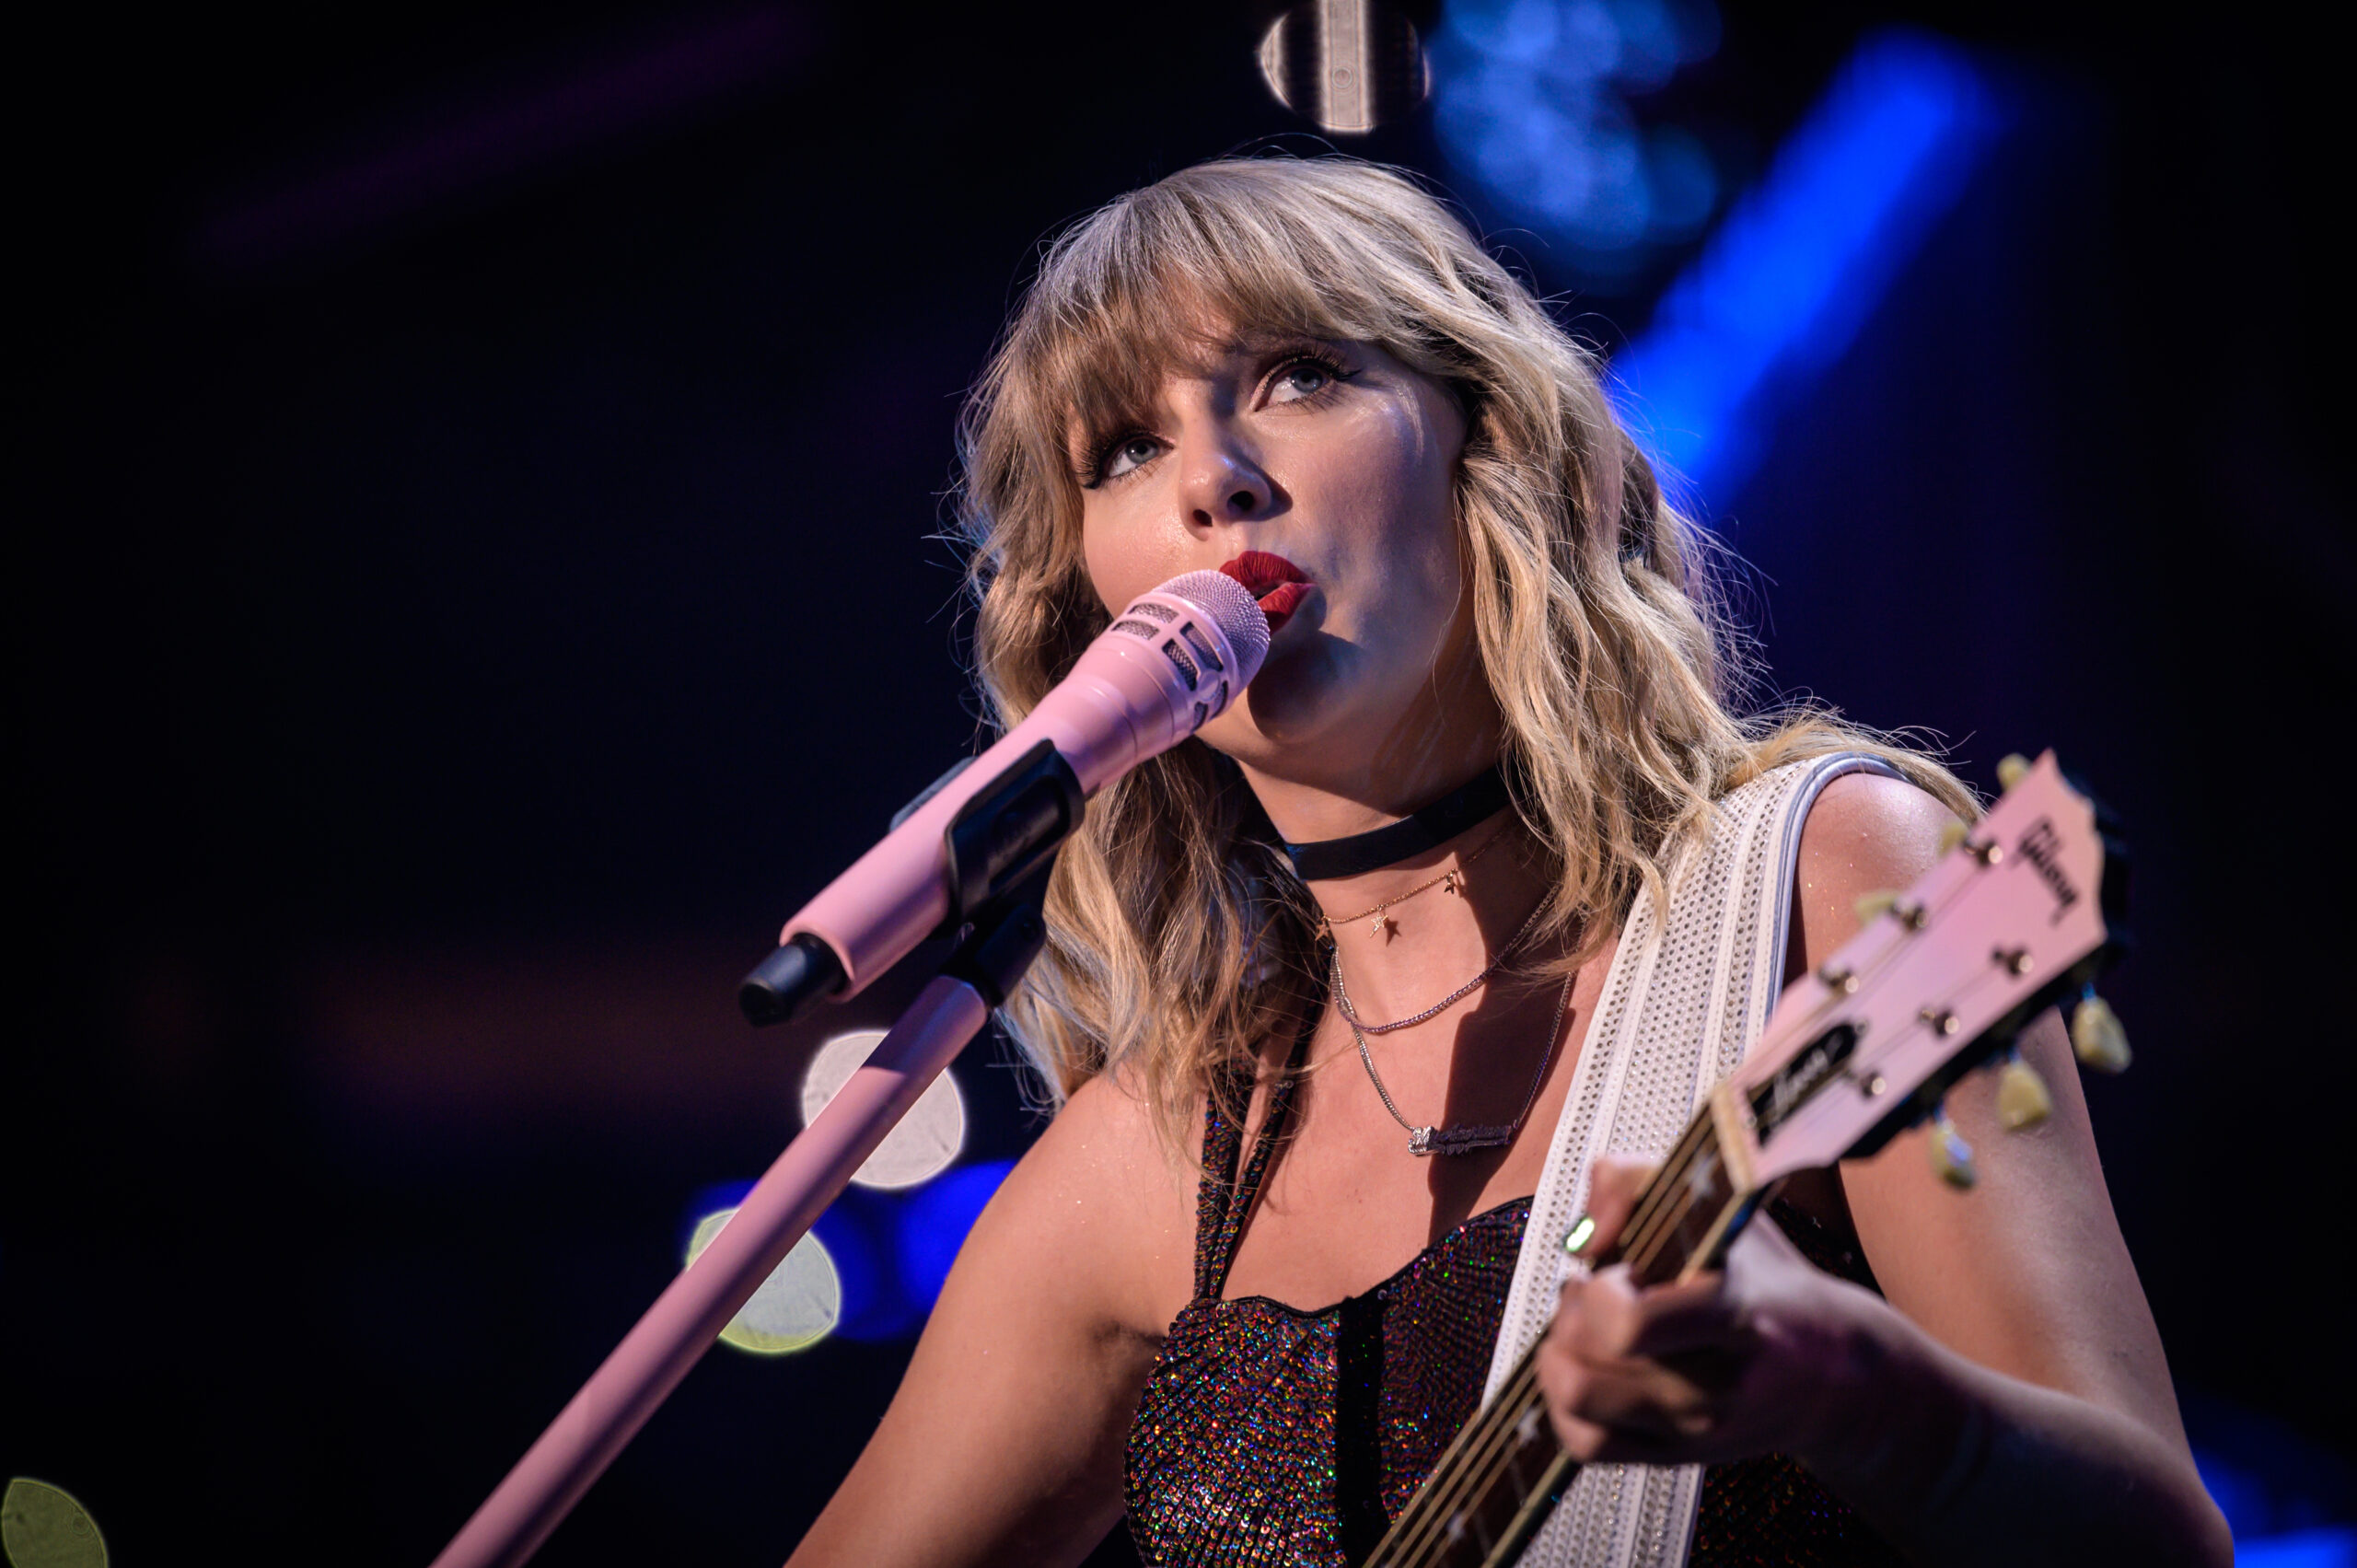 New York, NY, USA - December 13, 2019: Taylor Swift performs at the 2019 Z100 Jingle Ball at Madison Square Garden. (photo credit: Brian Friedman)